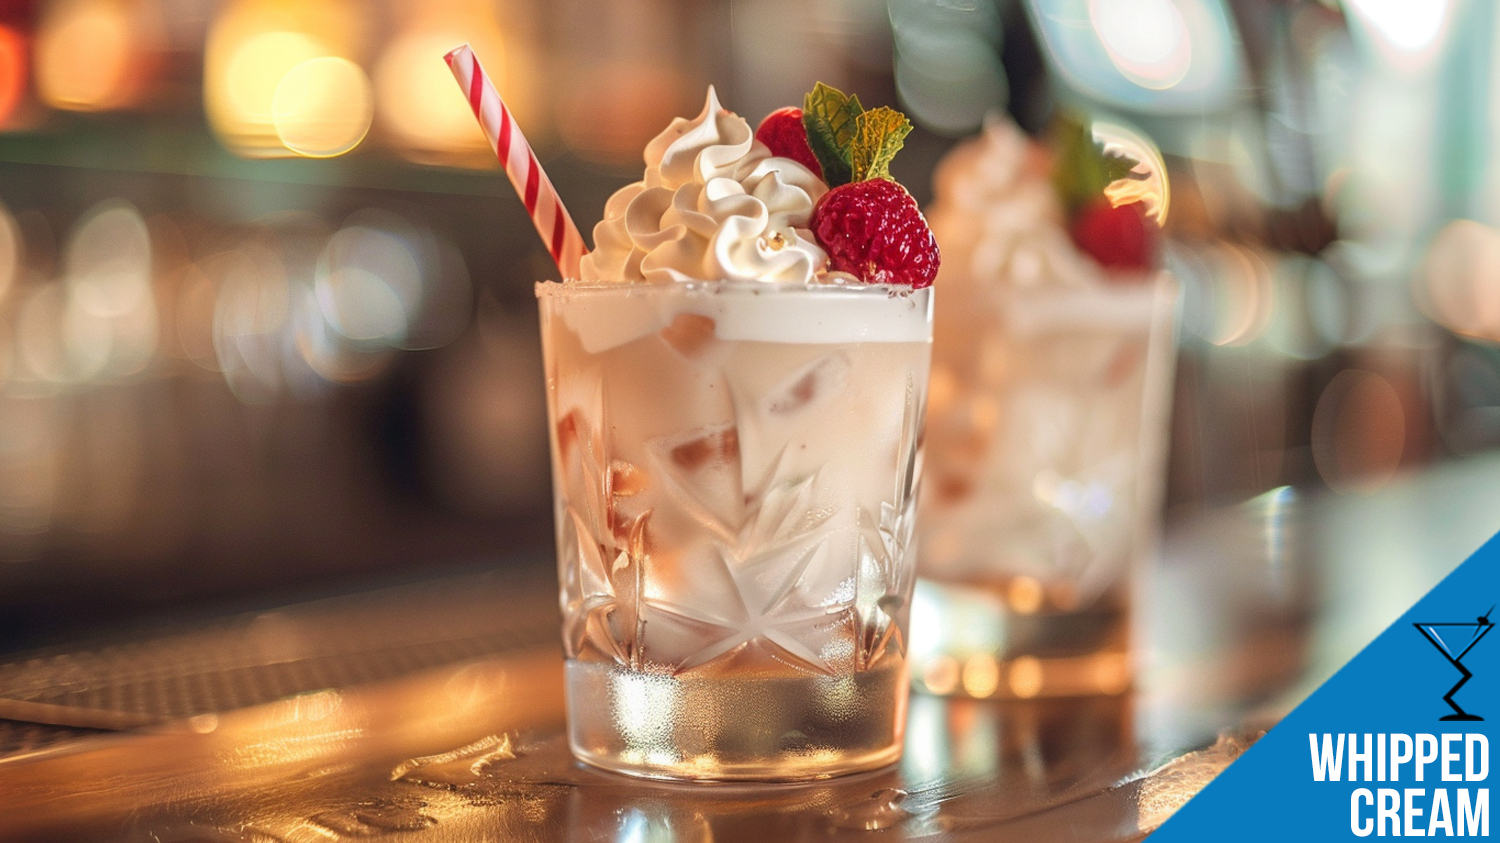 Best Whipped Cream Cocktails: Indulgent Recipes, Flavors, and Top Brands